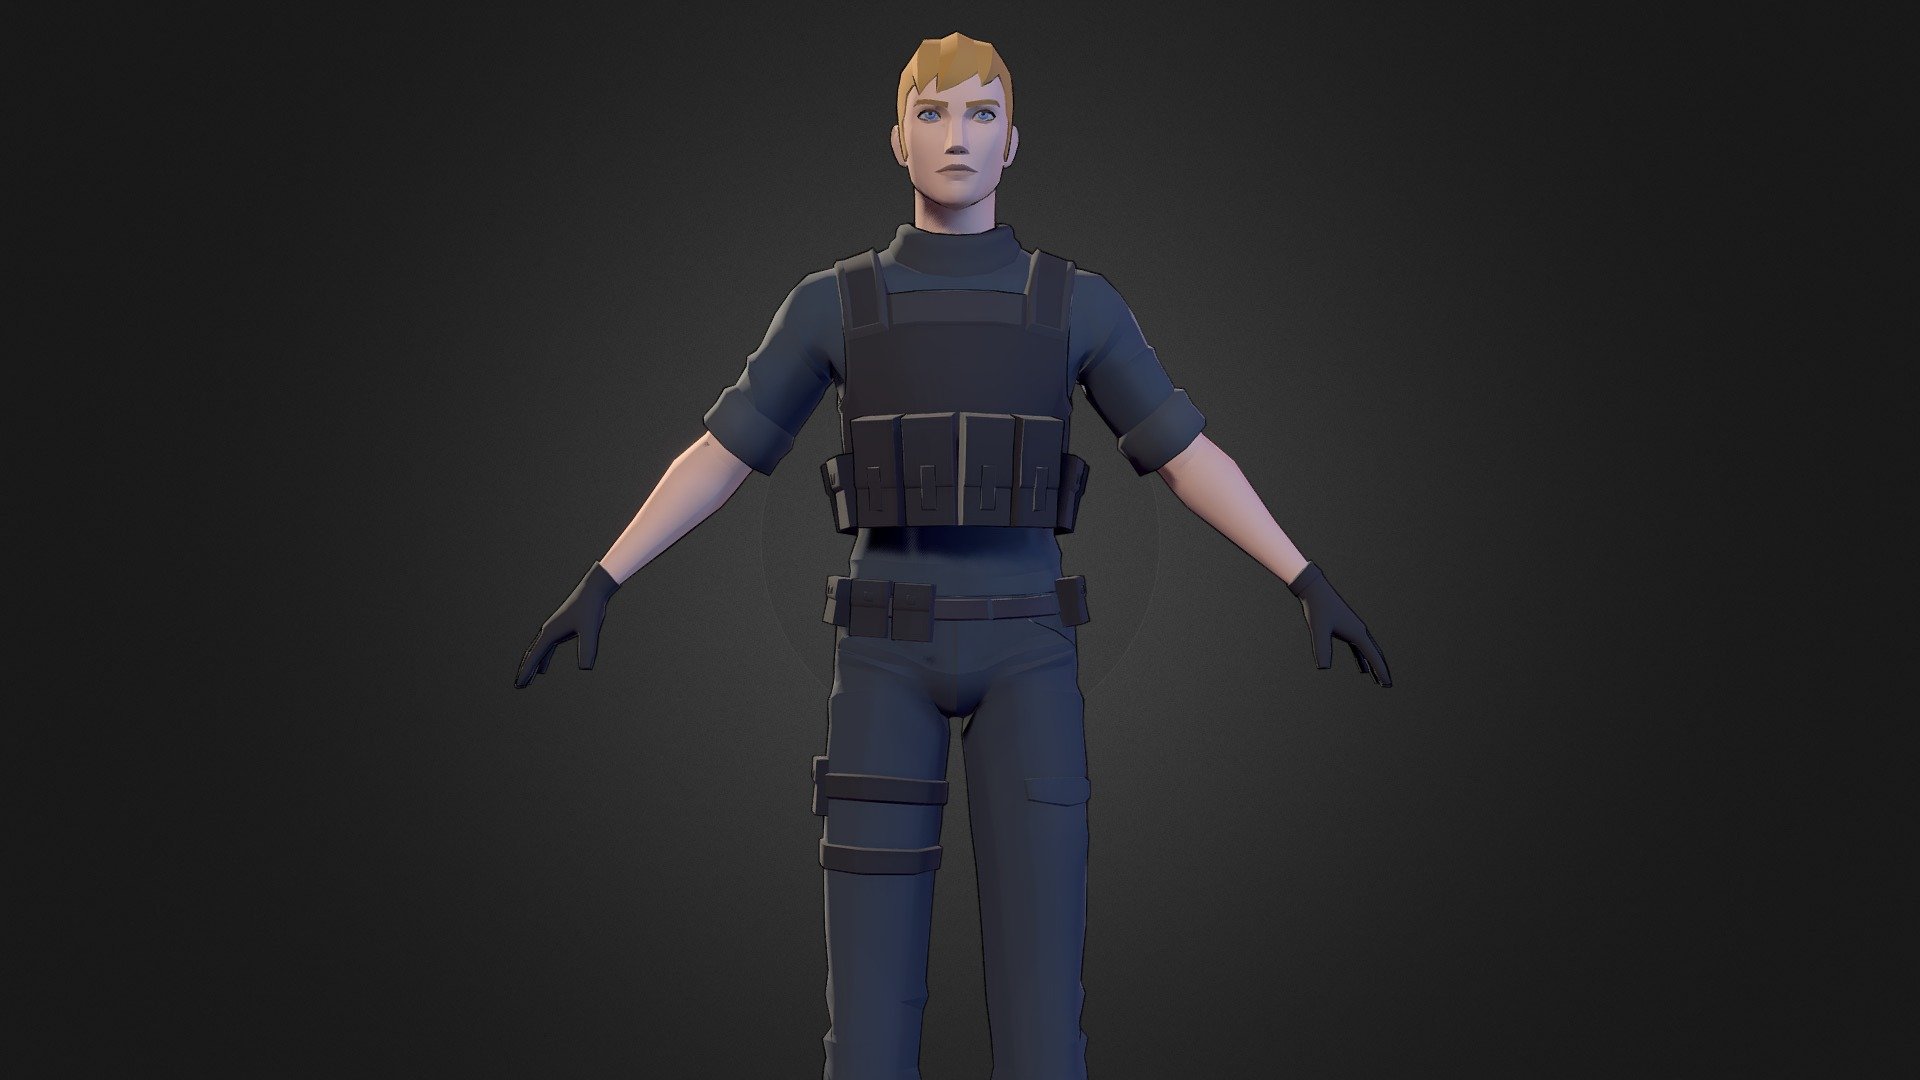 Lowpoly character with customizable outfit, optimized materials, and basic blendshapes for facial expressions

*** Includes character customization demo (Unity3D)**

Features:




Humanoid rig compatible with mixamo and other animation packages

Customizable outfits

Uses a single material with a lightweight atlas texture

Includes character customization demo

The samples use the Built-in pipeline and the Post Processing Stack v2

No animations included

Customization options:




3 hairstyles

17 combinations of shirts and jackets

3 gloves

10 pants/shorts

4 shoes

Videos




Animation tests: https://www.youtube.com/watch?v=8Ptf_gWXRHY

Customization sample: https://www.youtube.com/watch?v=Njb74D4FHLw


 - David - Lowpoly Customizable Character - Buy Royalty Free 3D model by Rukha93 3d model